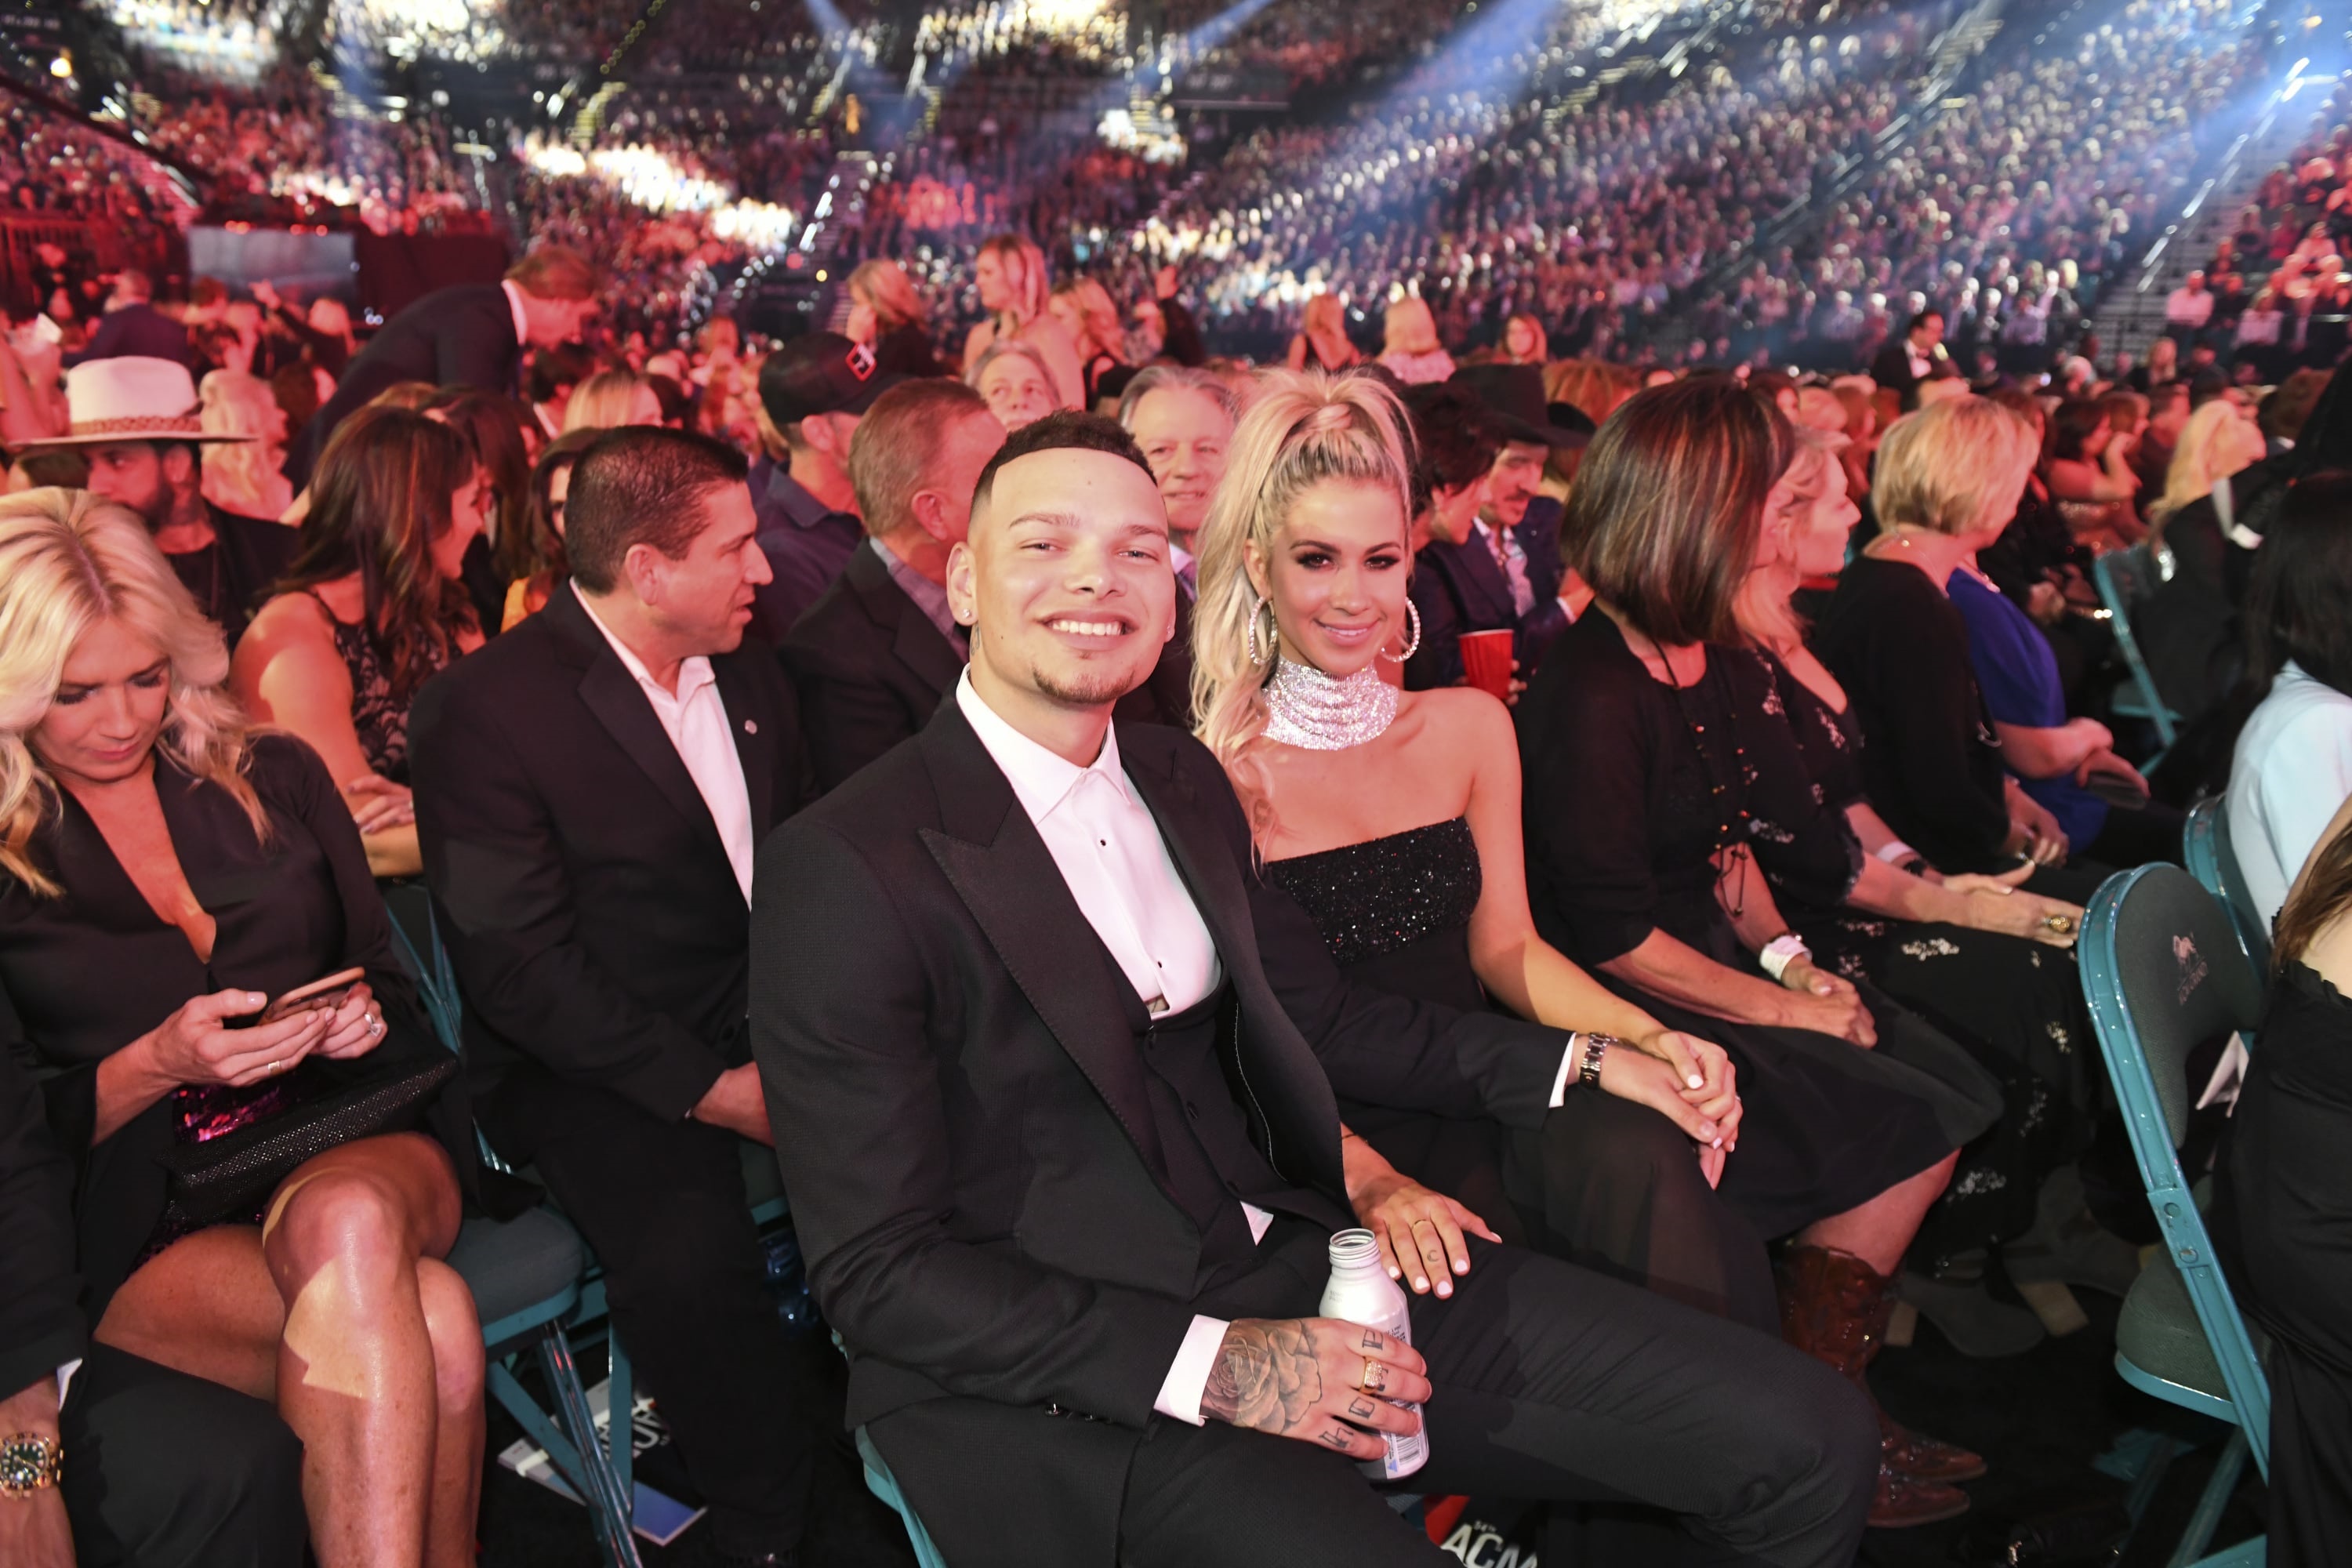 Kane Brown and Katelyn Jae during the 54TH ACADEMY OF COUNTRY MUSIC AWARDS, to broadcast LIVE from MGM Grand Garden Arena in Las Vegas Sunday, April 7, 2019 (8:00-11:00 PM, ET/delayed PT) on the CBS Television Network. Photo: Sam Morris/CBS Â©2019 CBS Broadcasting, Inc. All Rights Reserved